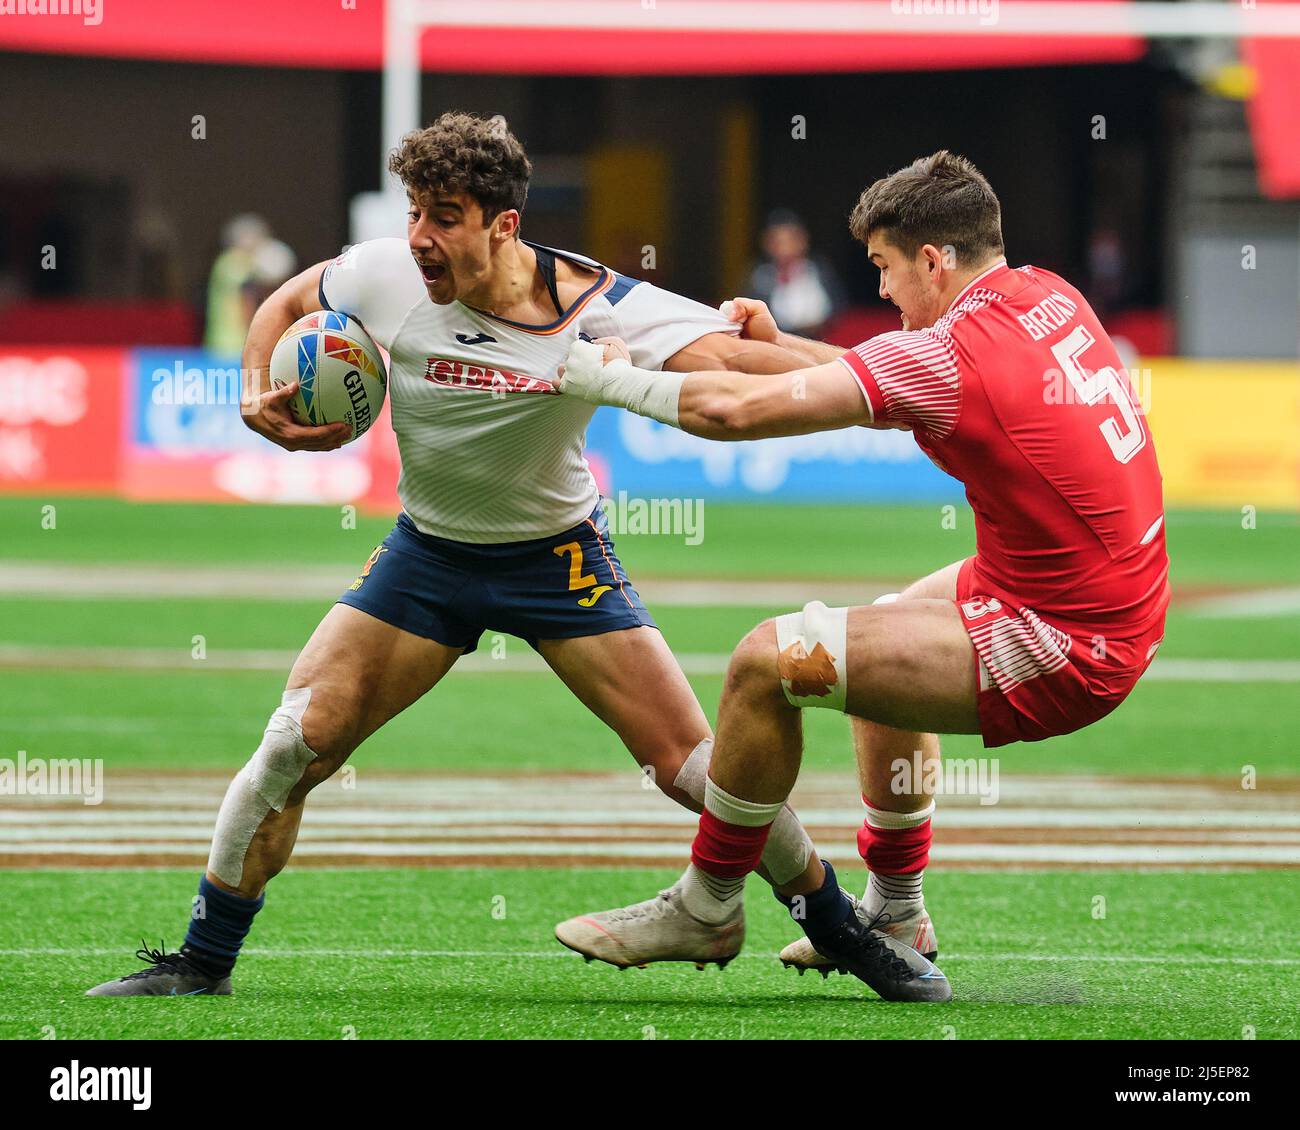 Vancouver, Canada. 17th April, 2022. Josep Serres #2 of Spain tackled by Tom Brown #5 of Wales during the HSBC World Rugby Sevens Series 2022 - Vancou Stock Photo